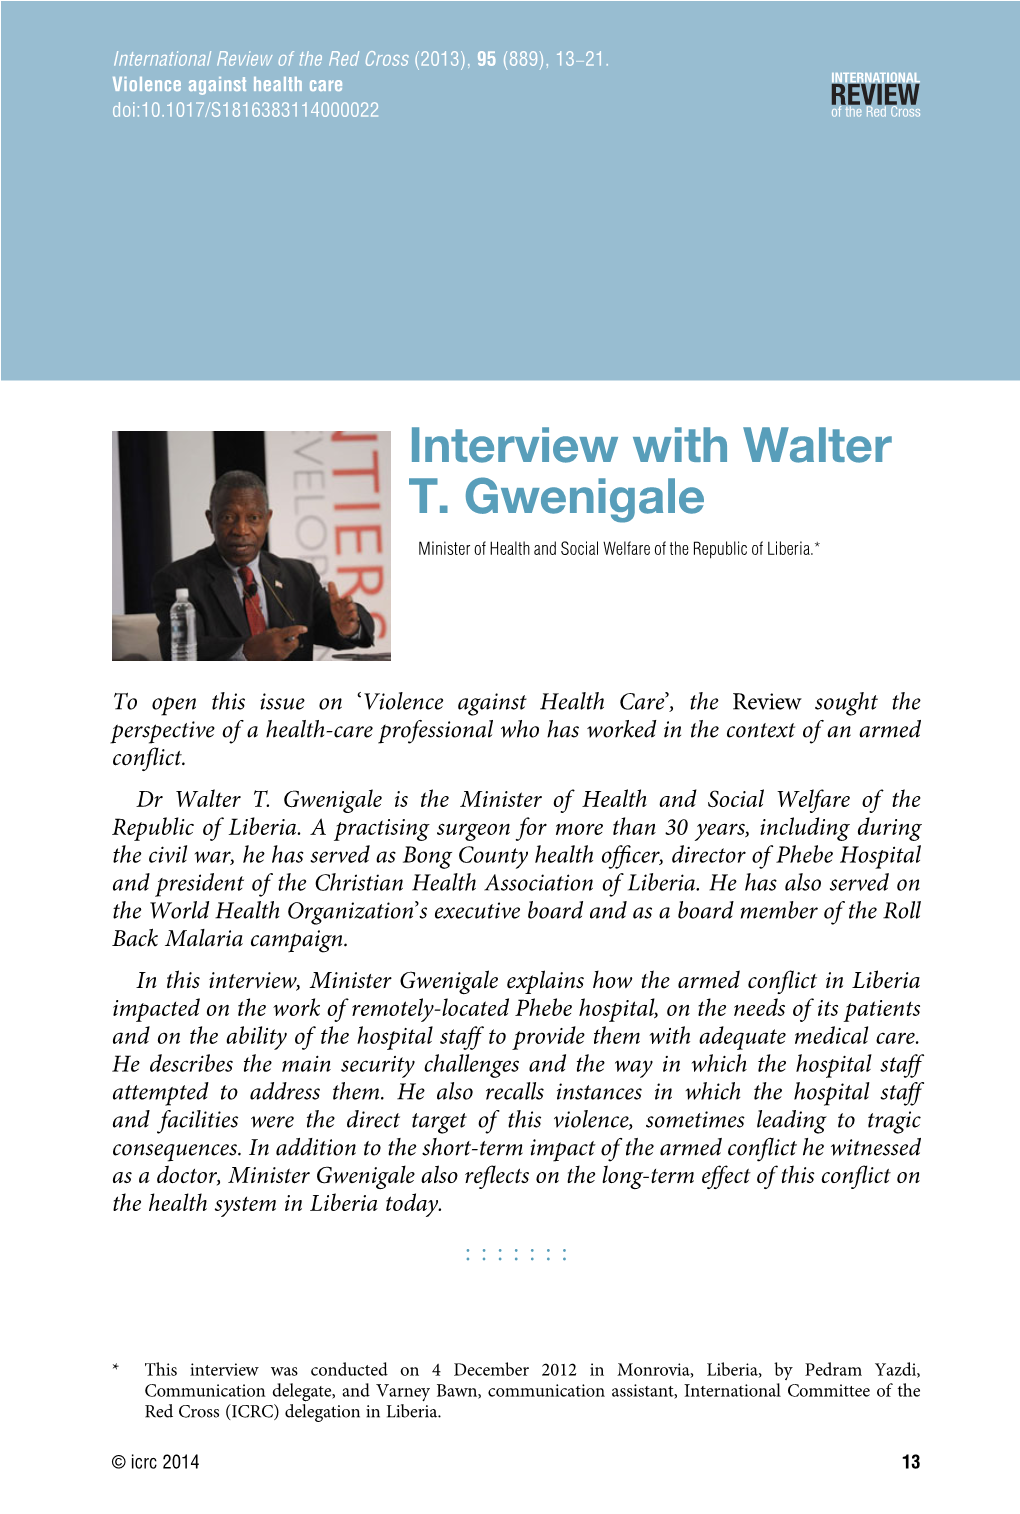 Interview with Walter T. Gwenigale Minister of Health and Social Welfare of the Republic of Liberia.*